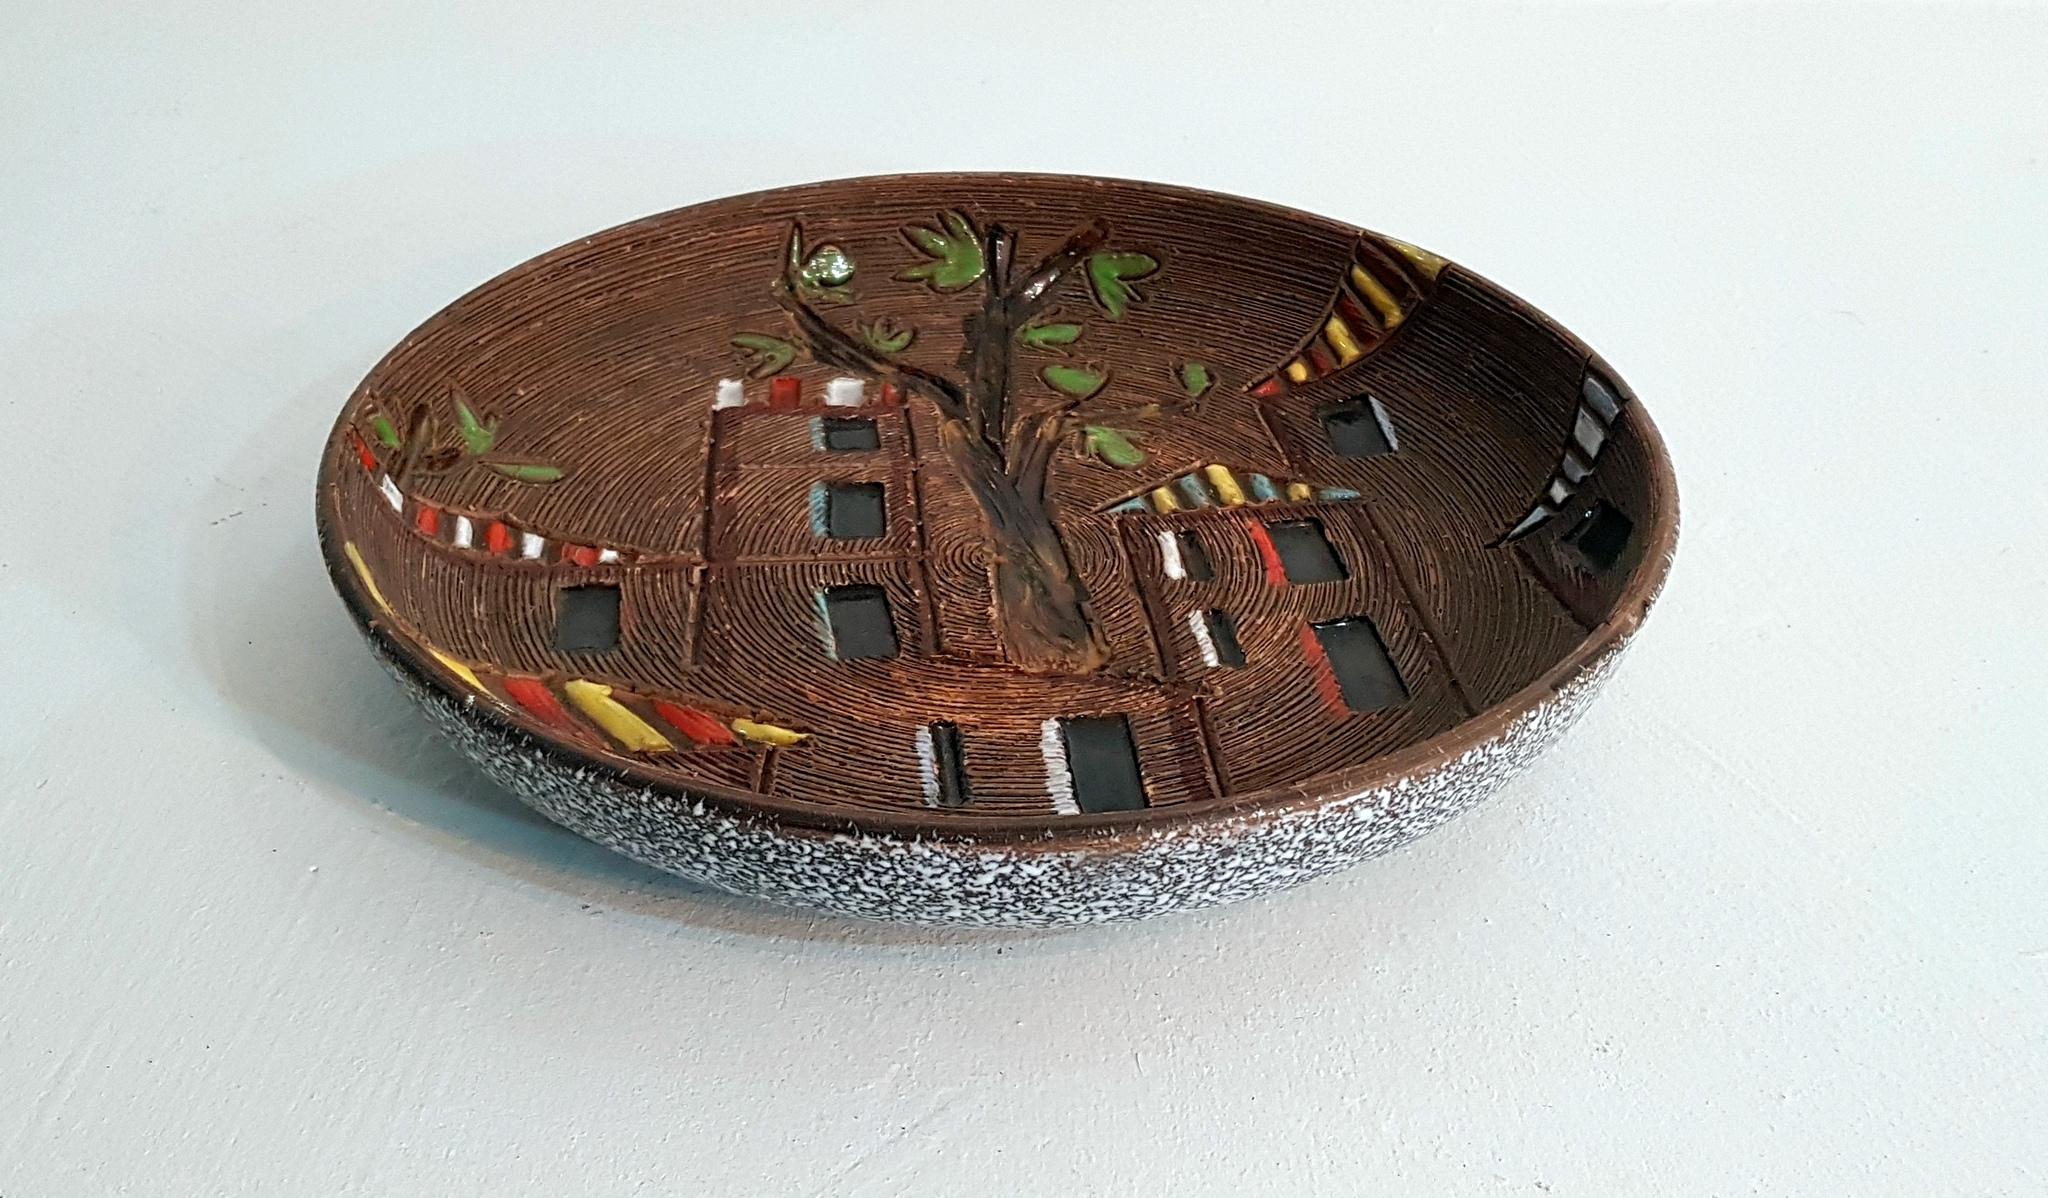 Round ceramic bowl with decor of houses and tree. Can be hung on the wall or used for fruit etc.